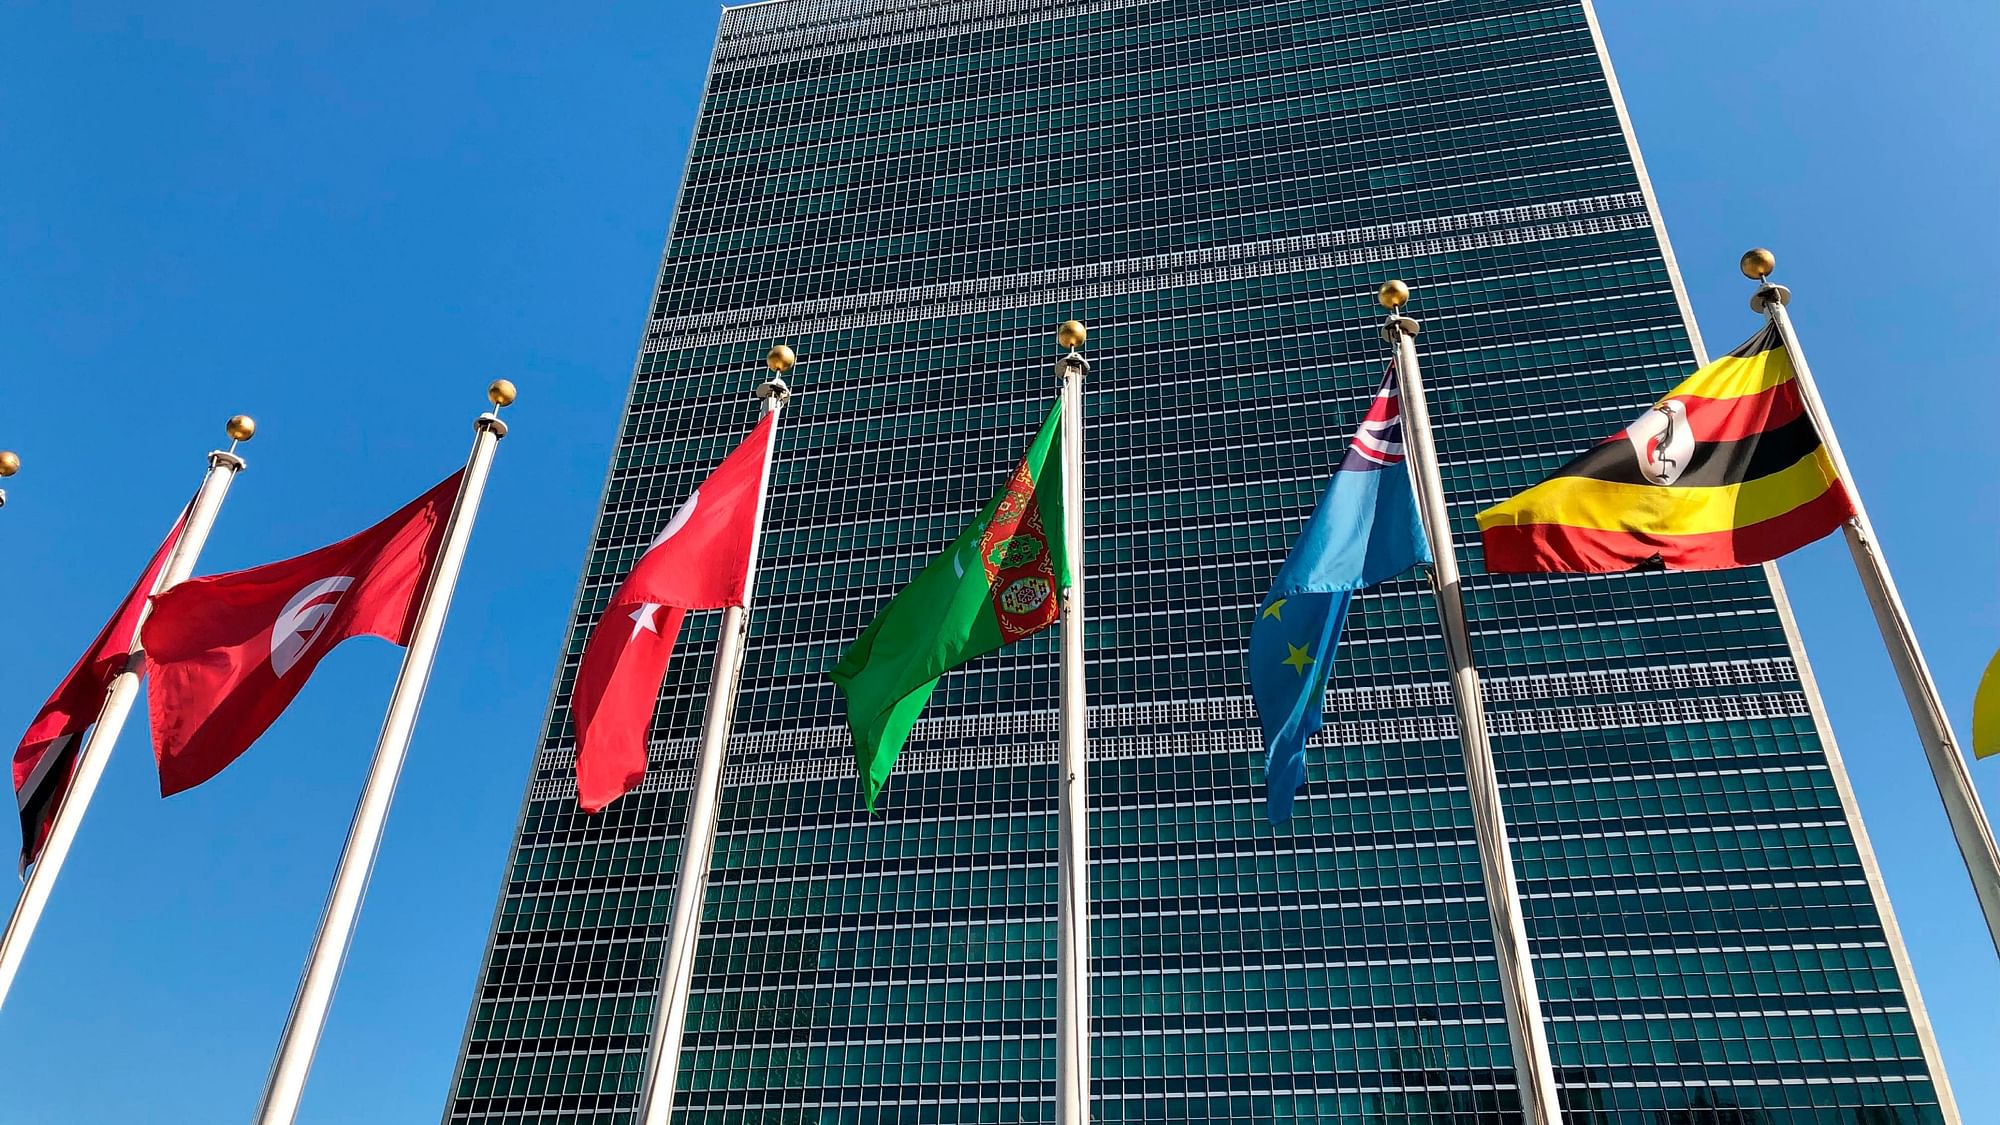 The United Nations General Assembly has unanimously adopted a resolution, co-sponsored by 188 nations including India, on COVID-19, calling for intensified international cooperation to defeat the pandemic.